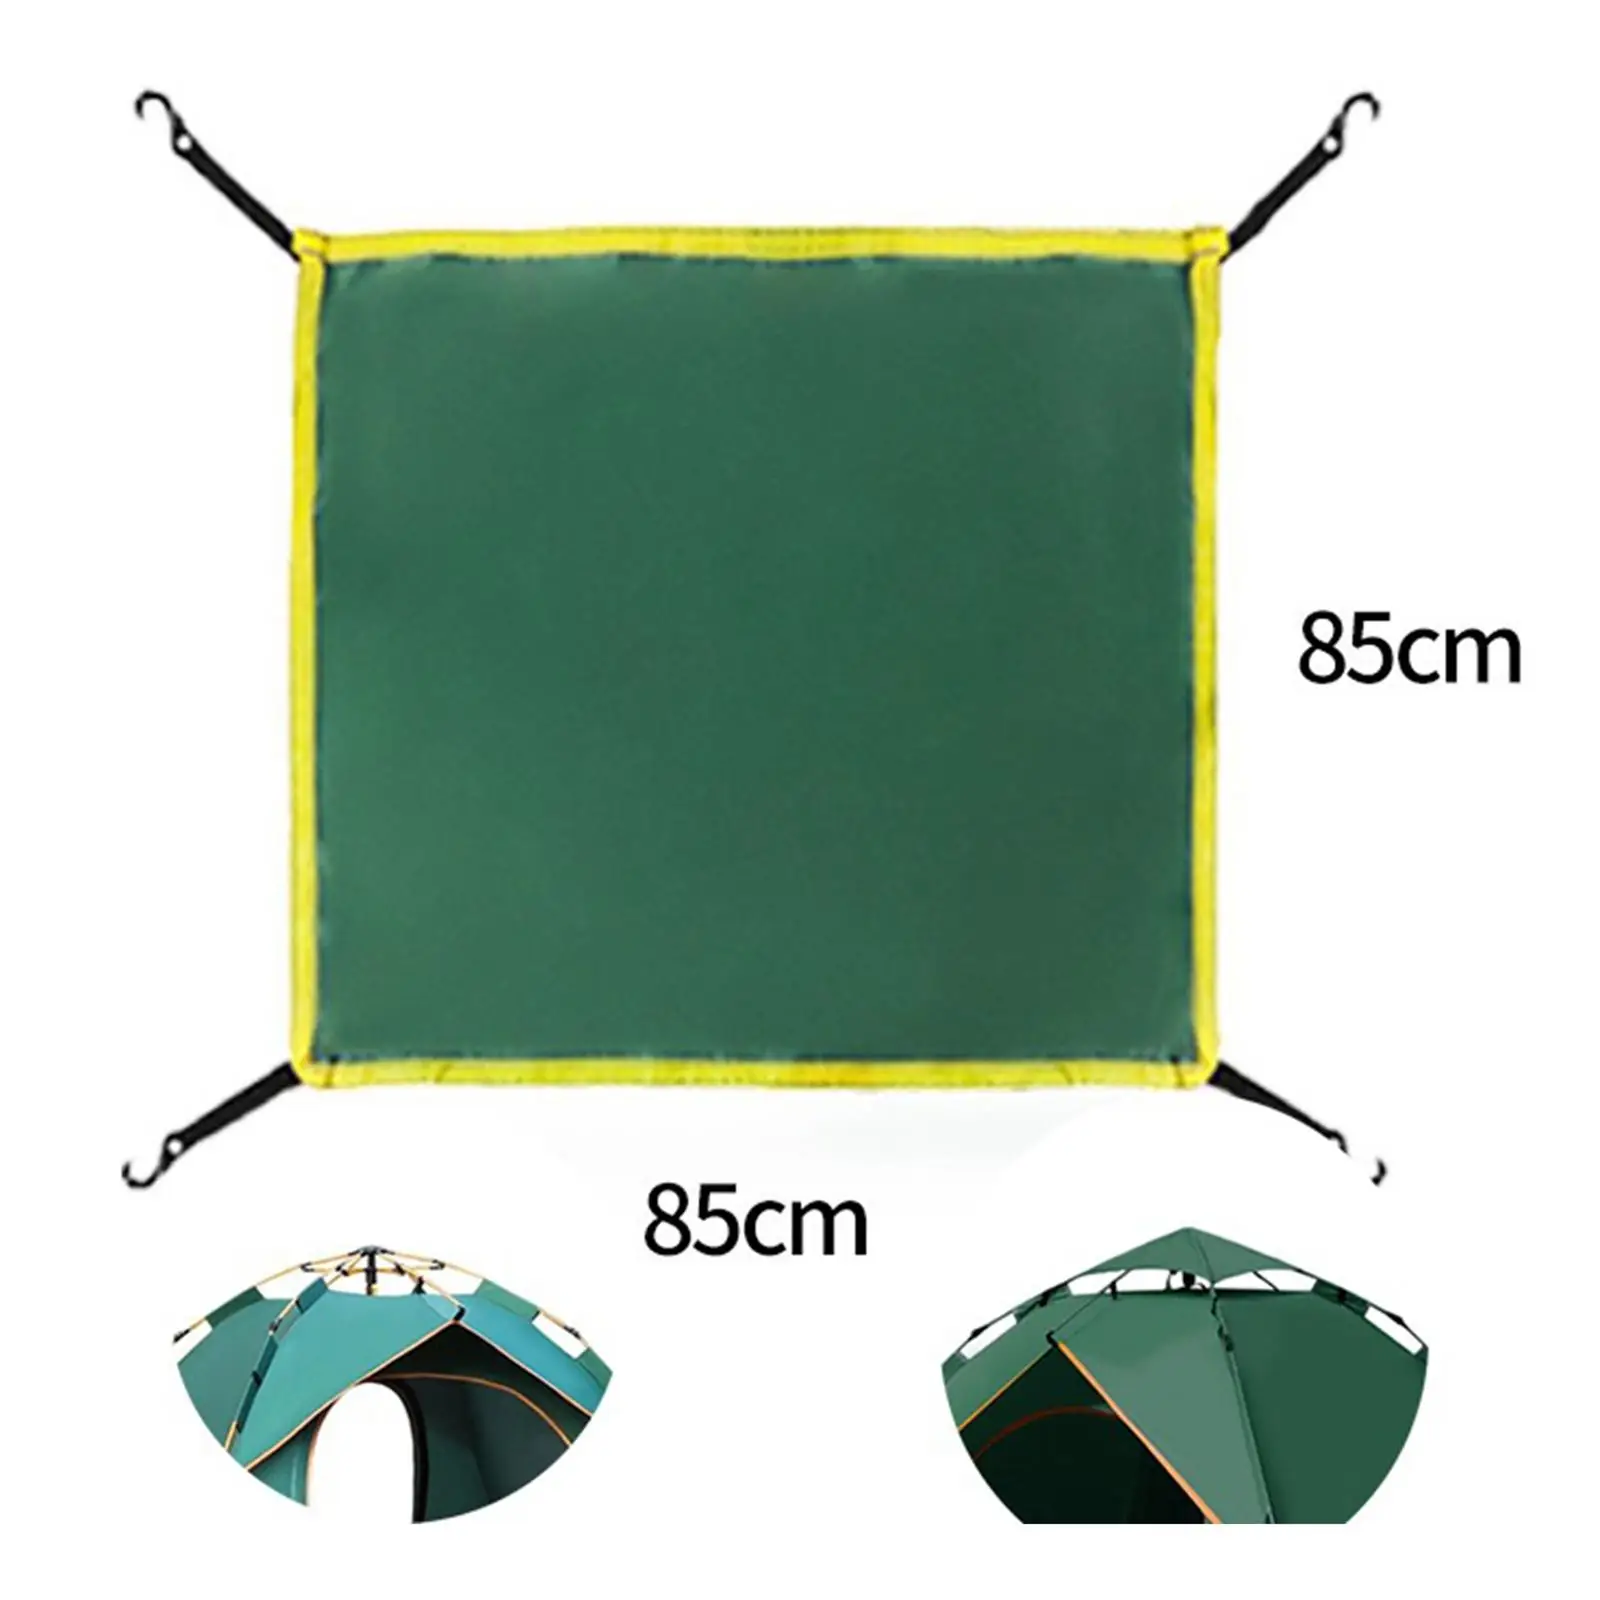 Canopy Tent Top Cover Sunproof Tarp Sun Protection Dome Tent Cover Tent Shade for Camping Hiking Backpacking Fishing Travel